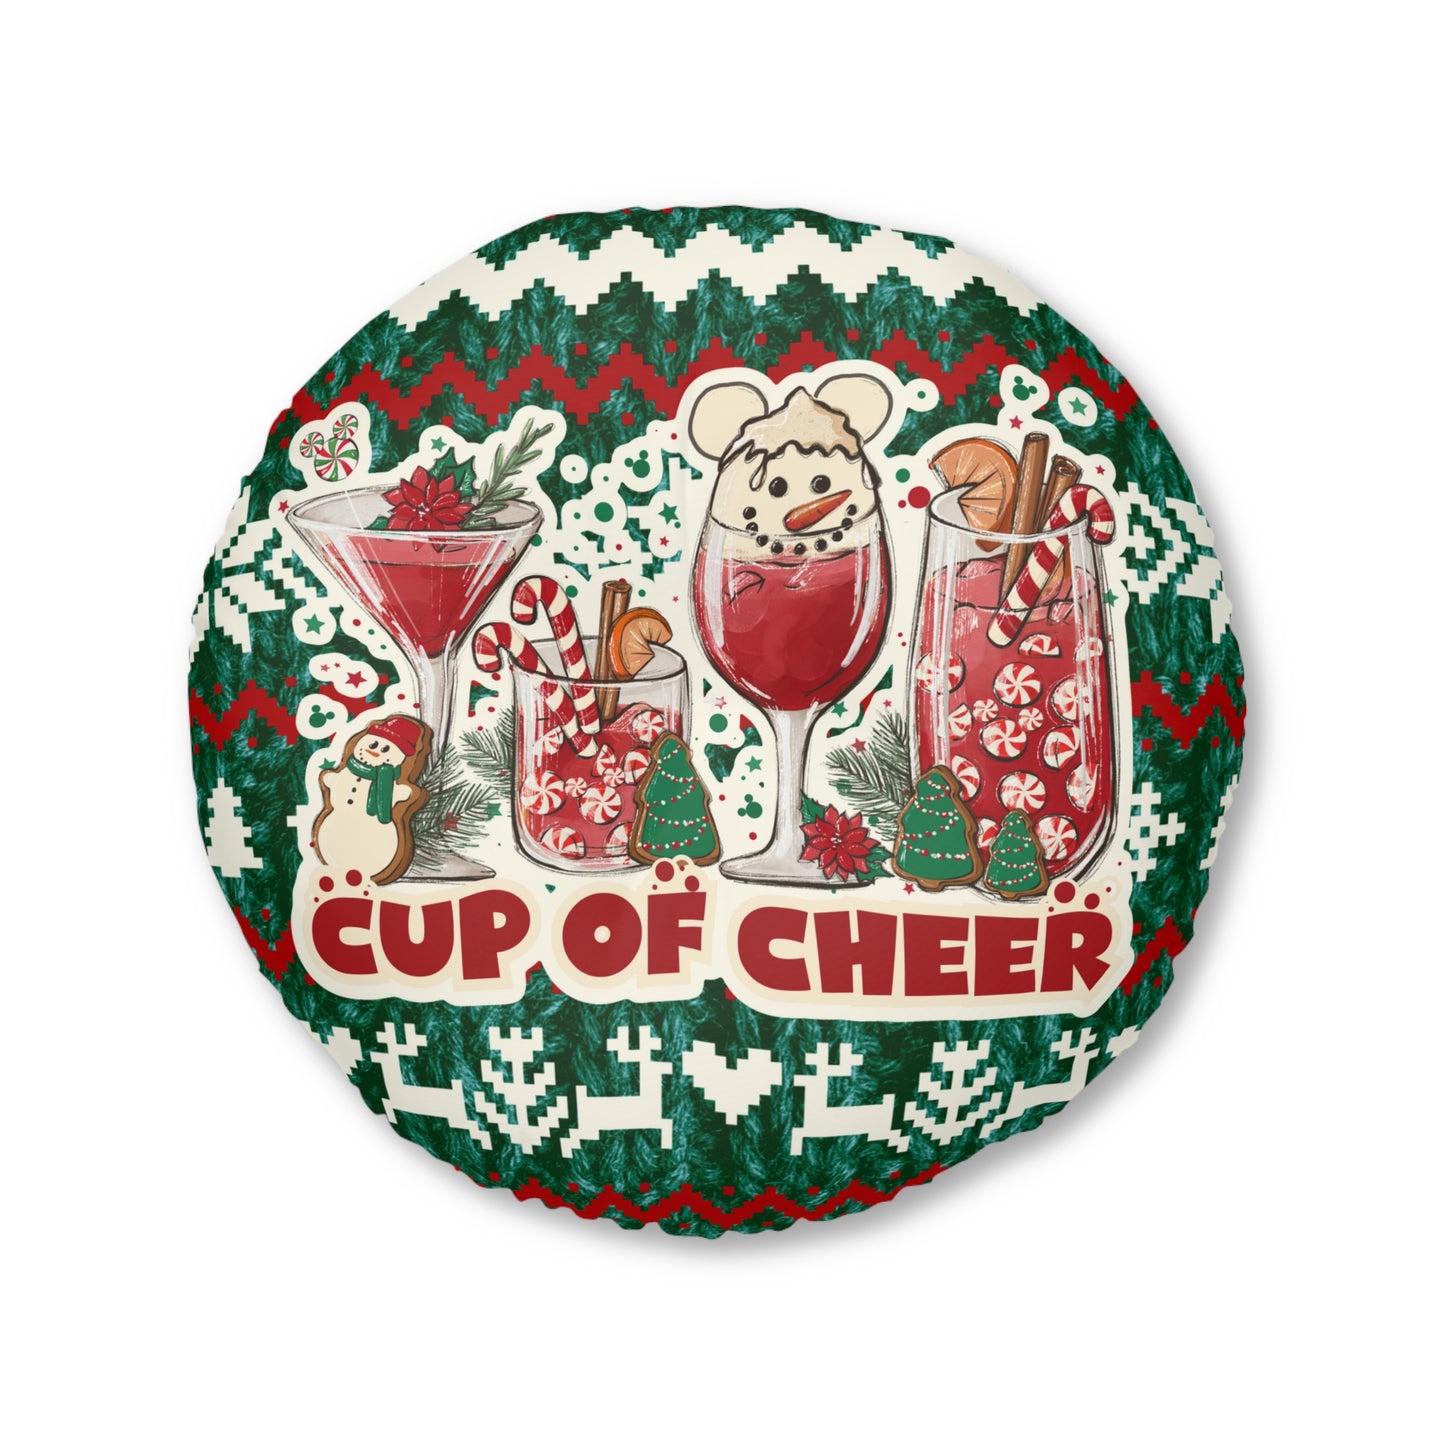 Cup of Cheer - Tufted Round Floor Pillow